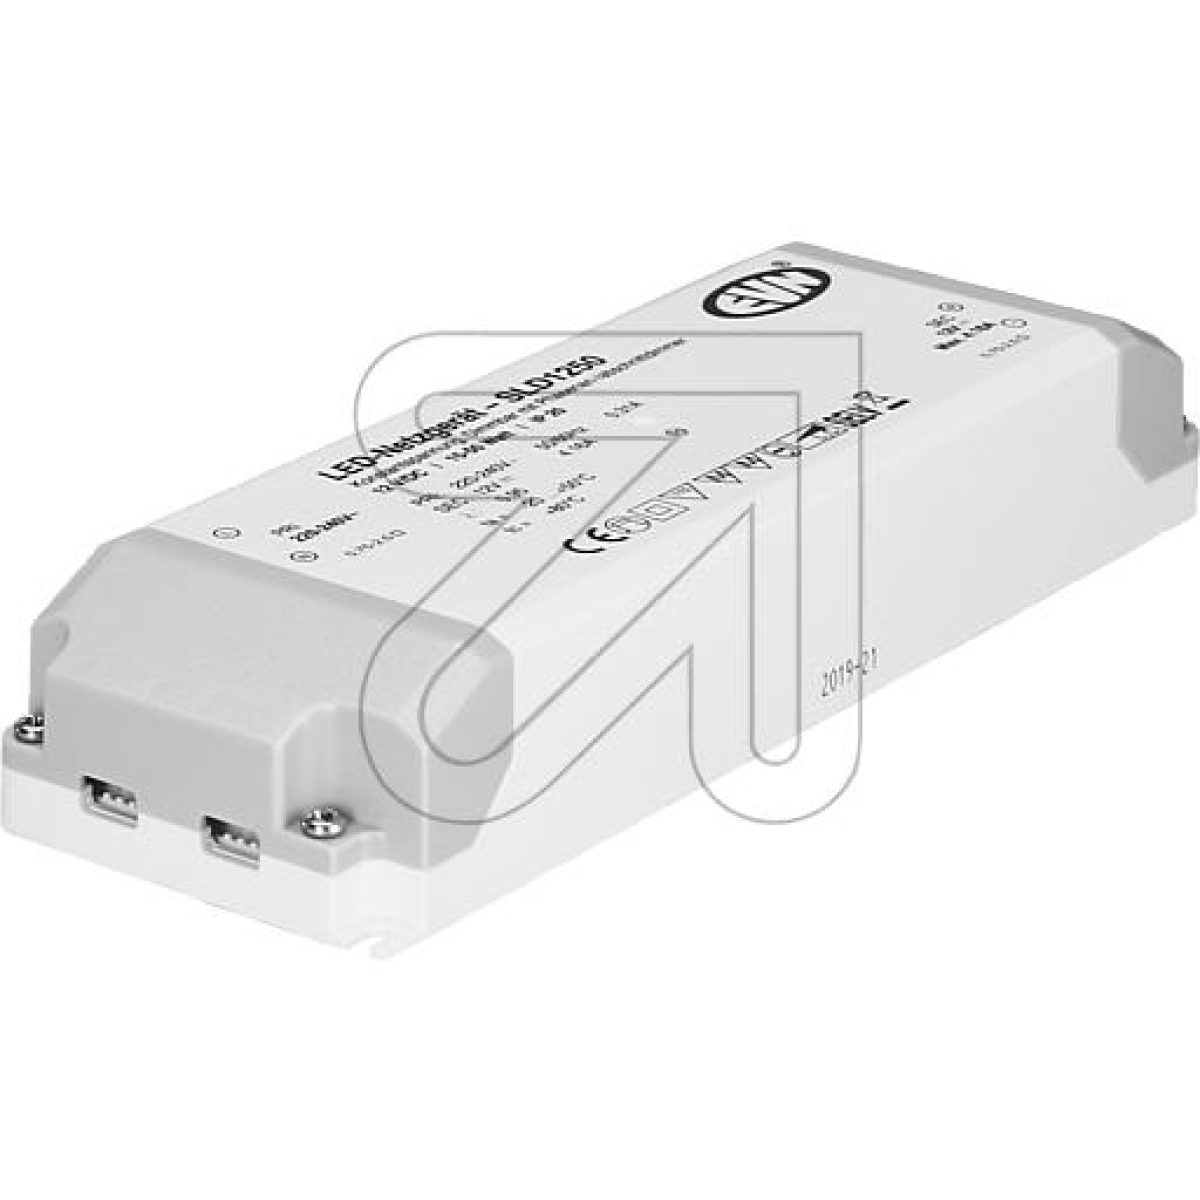 EVNLED power supply unit IP20 15-50W 12V/DC SLD1250Article-No: 611235